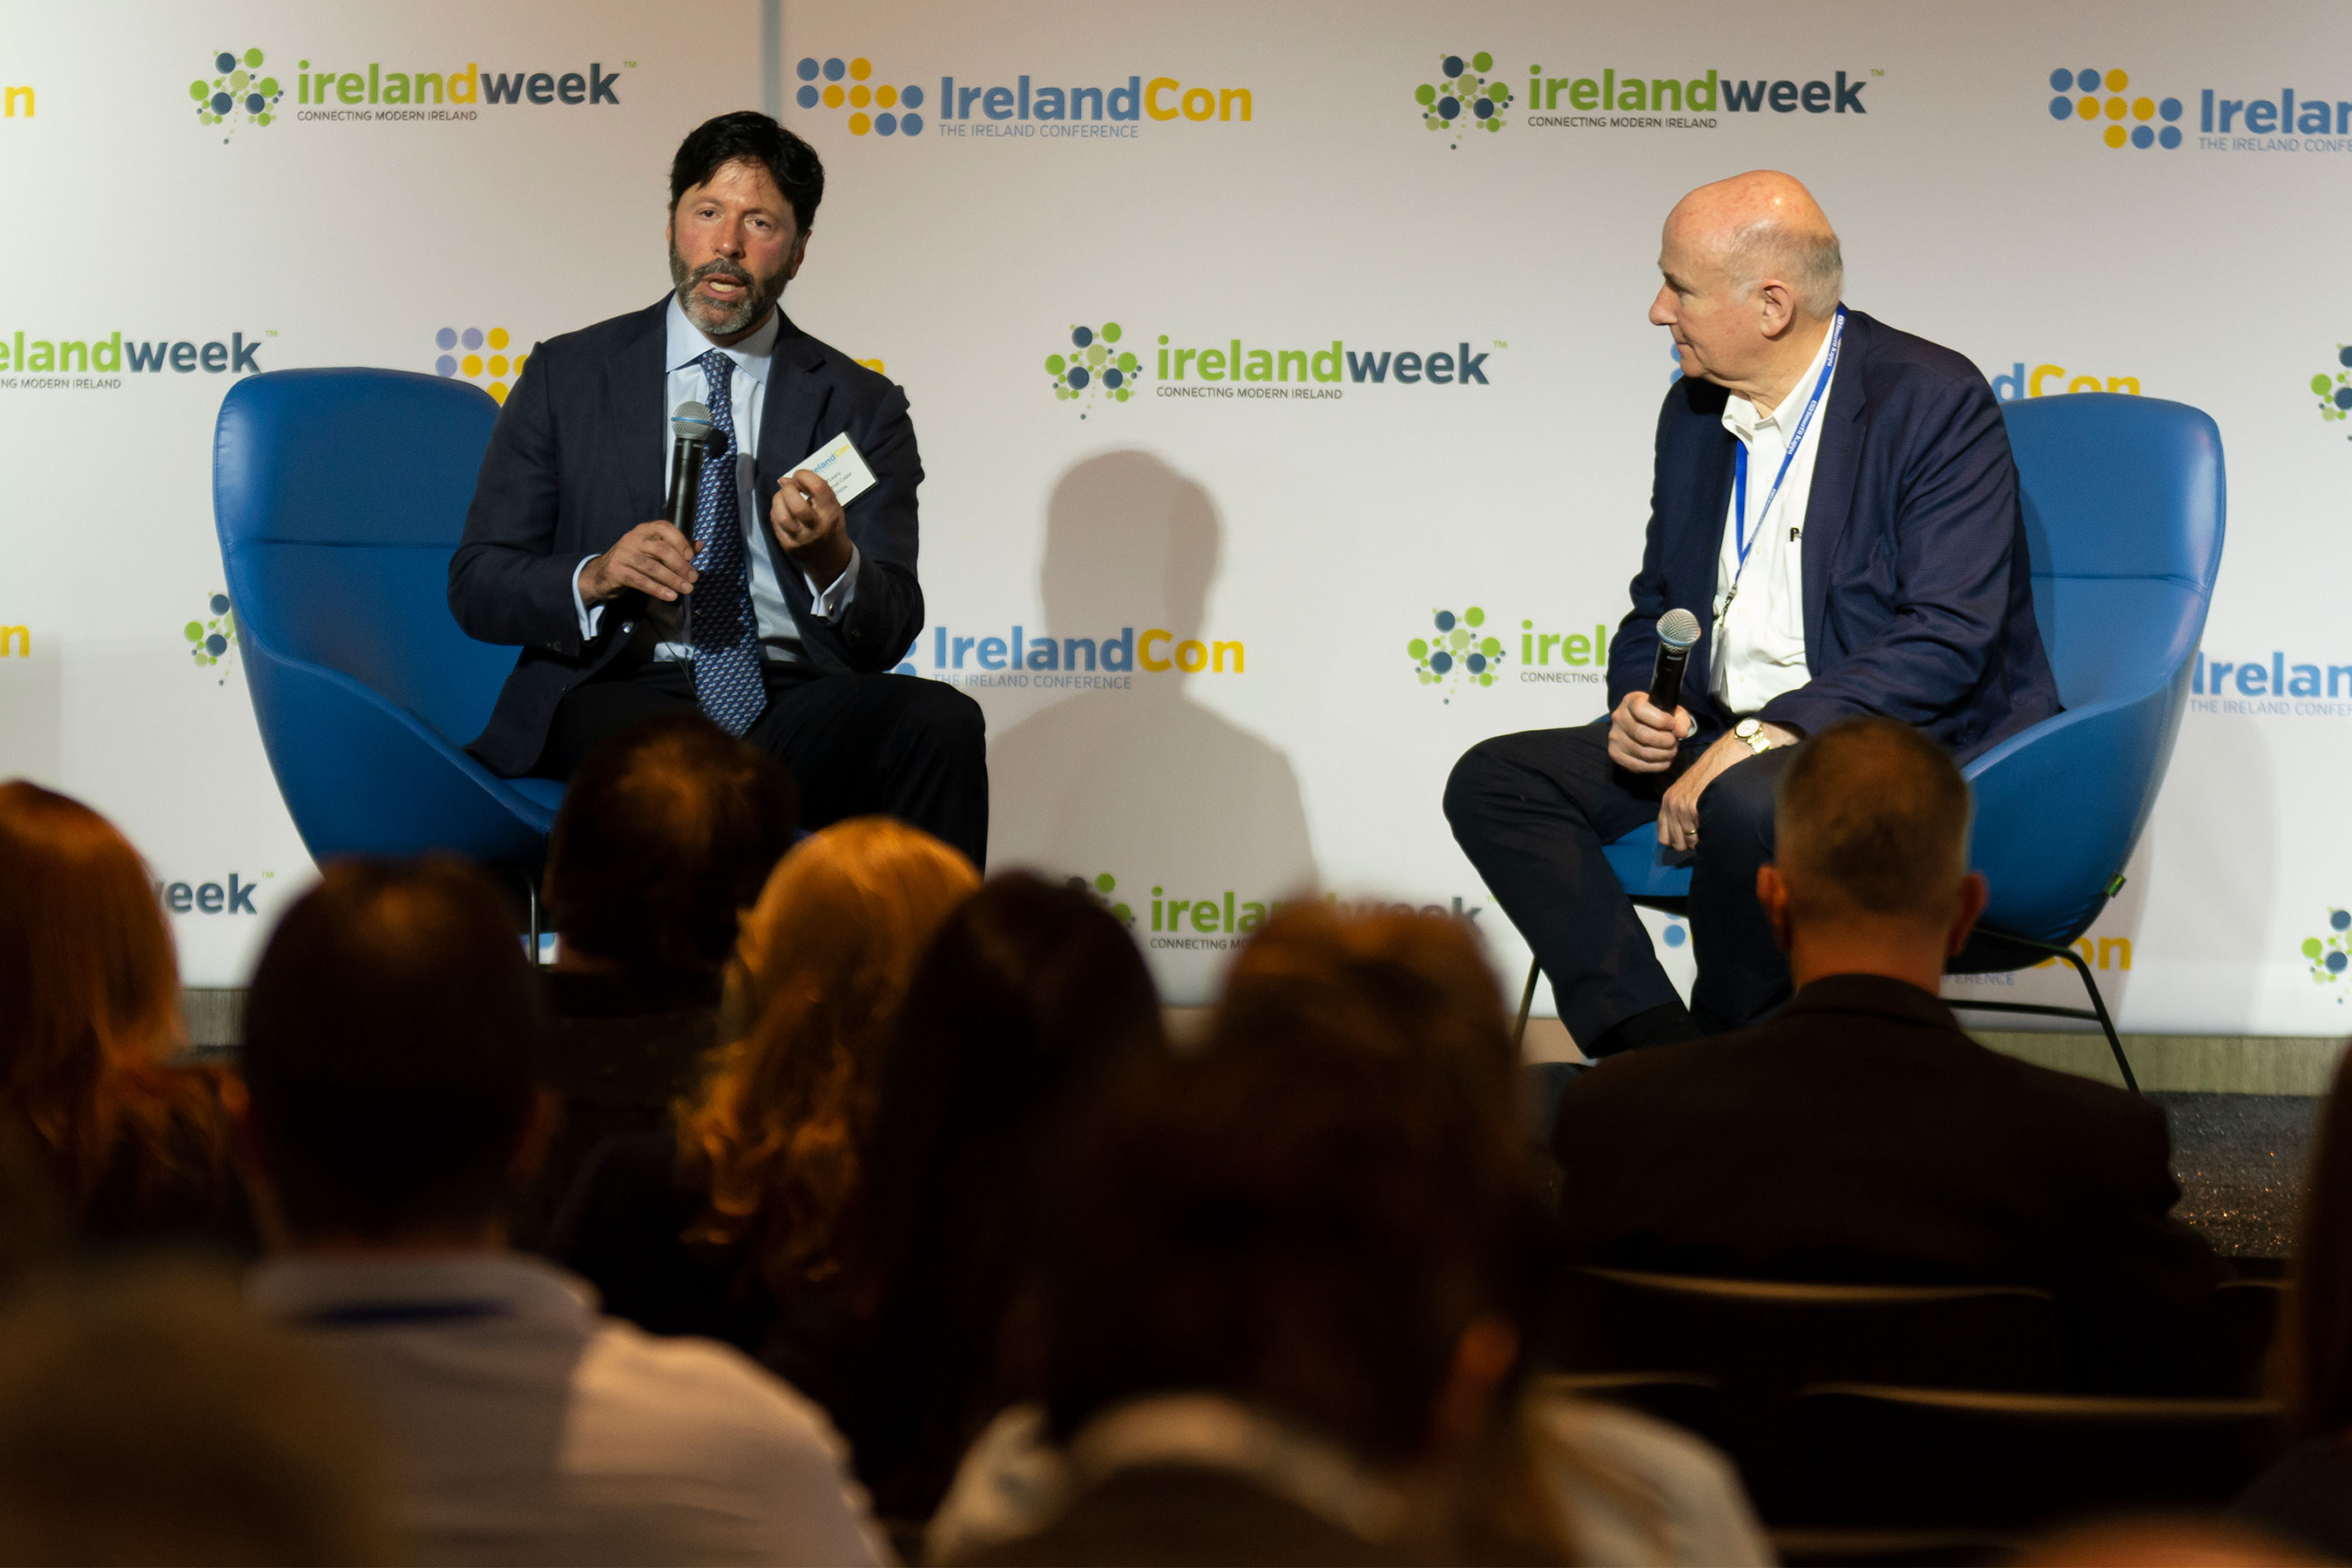 panelists presenting on Ireland's production tax incentives